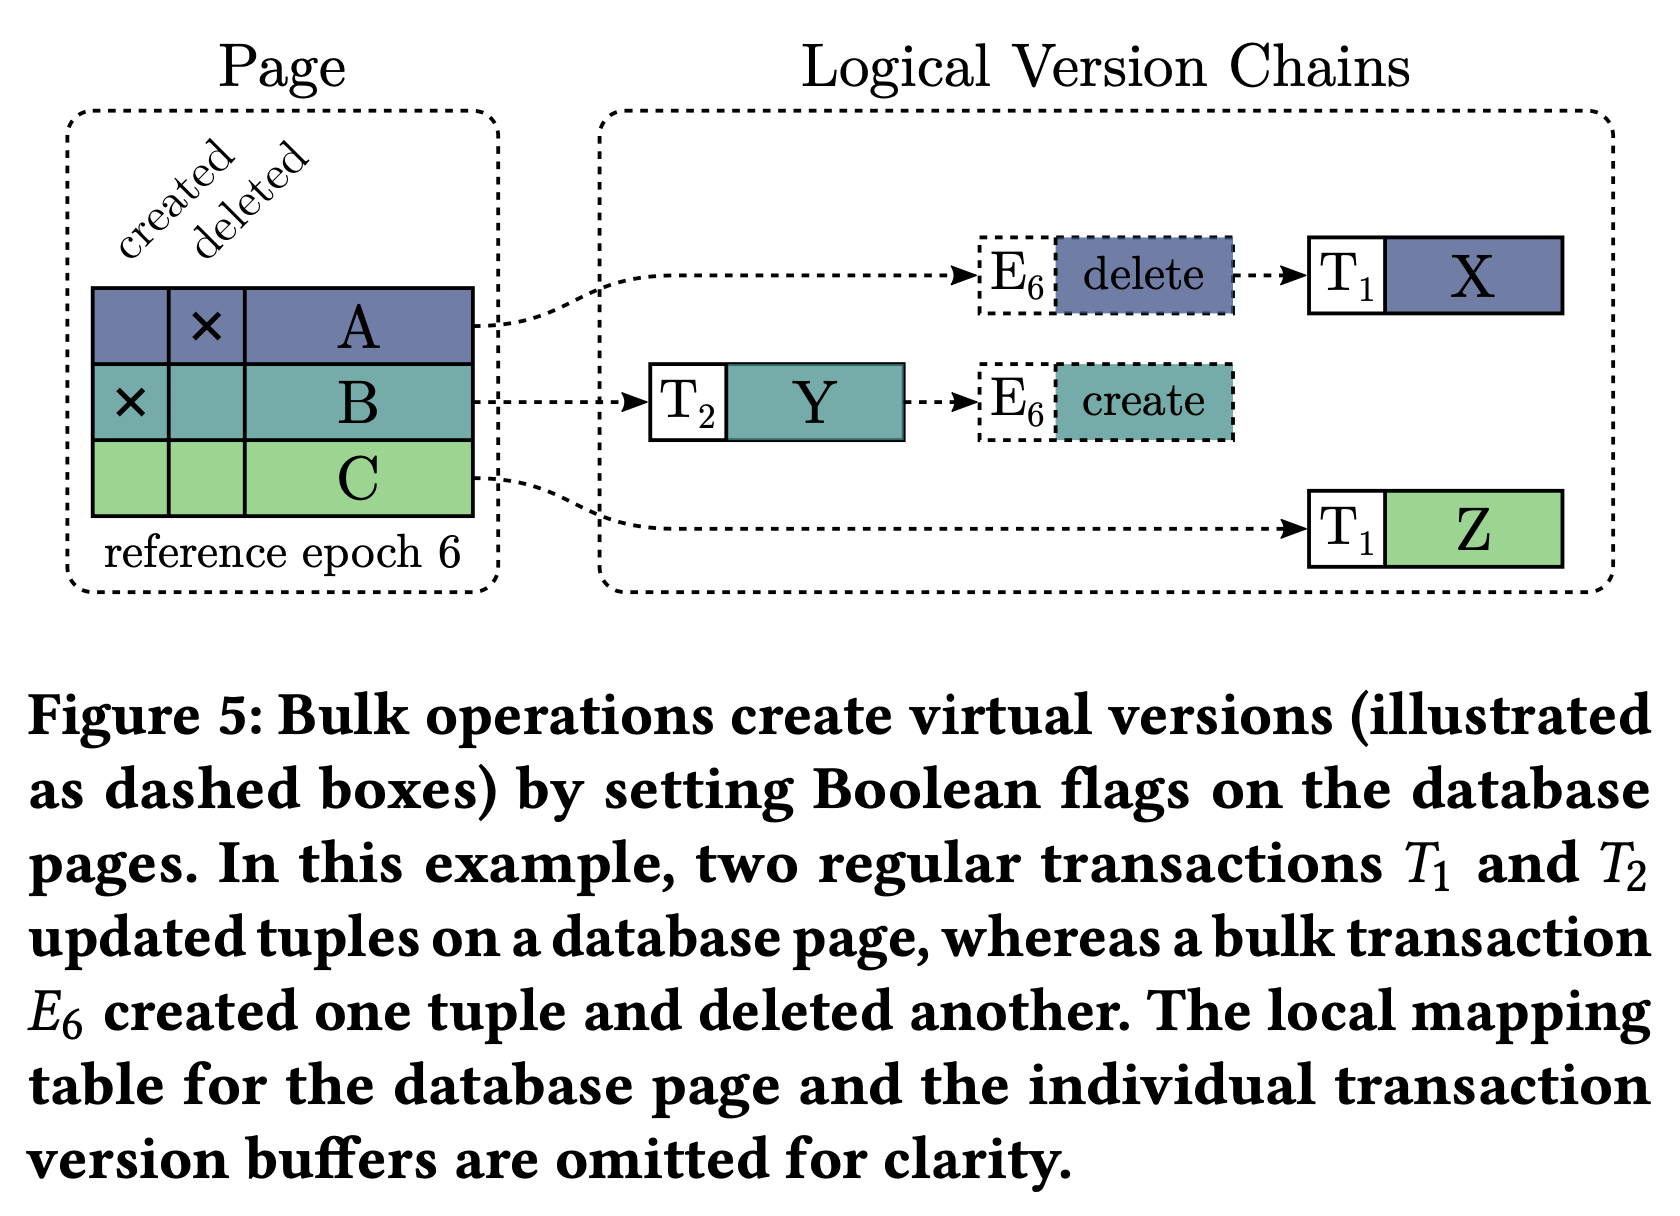 Figure 5: Bulk operations create virtual versions (illustrated as dashed boxes) by setting Boolean flags on the database pages